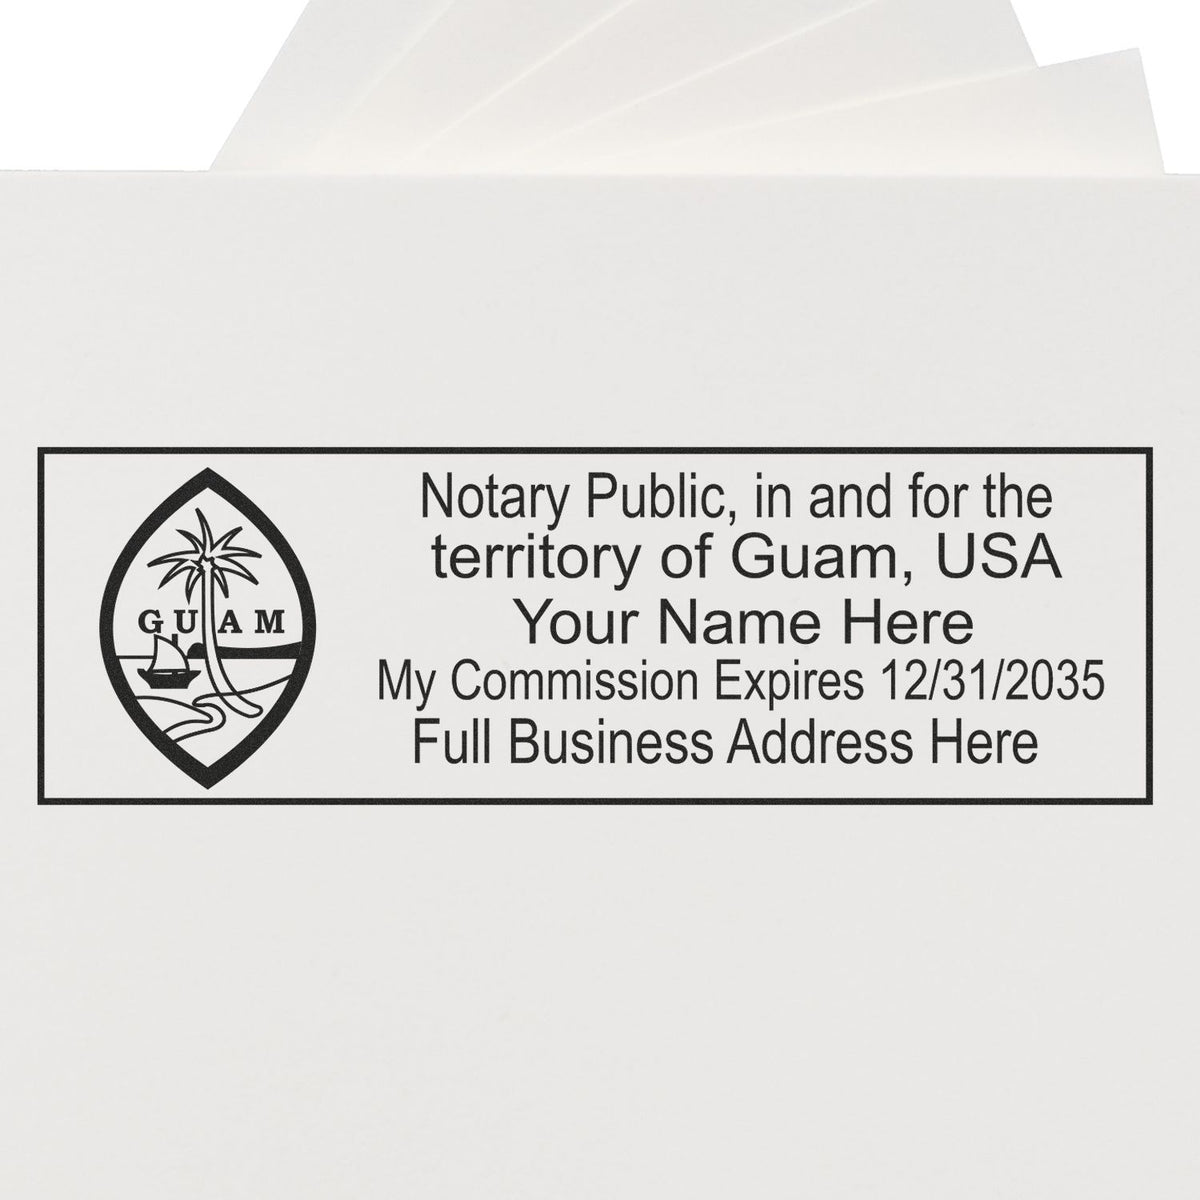 This paper is stamped with a sample imprint of the Slim Pre-Inked Rectangular Notary Stamp for Guam, signifying its quality and reliability.